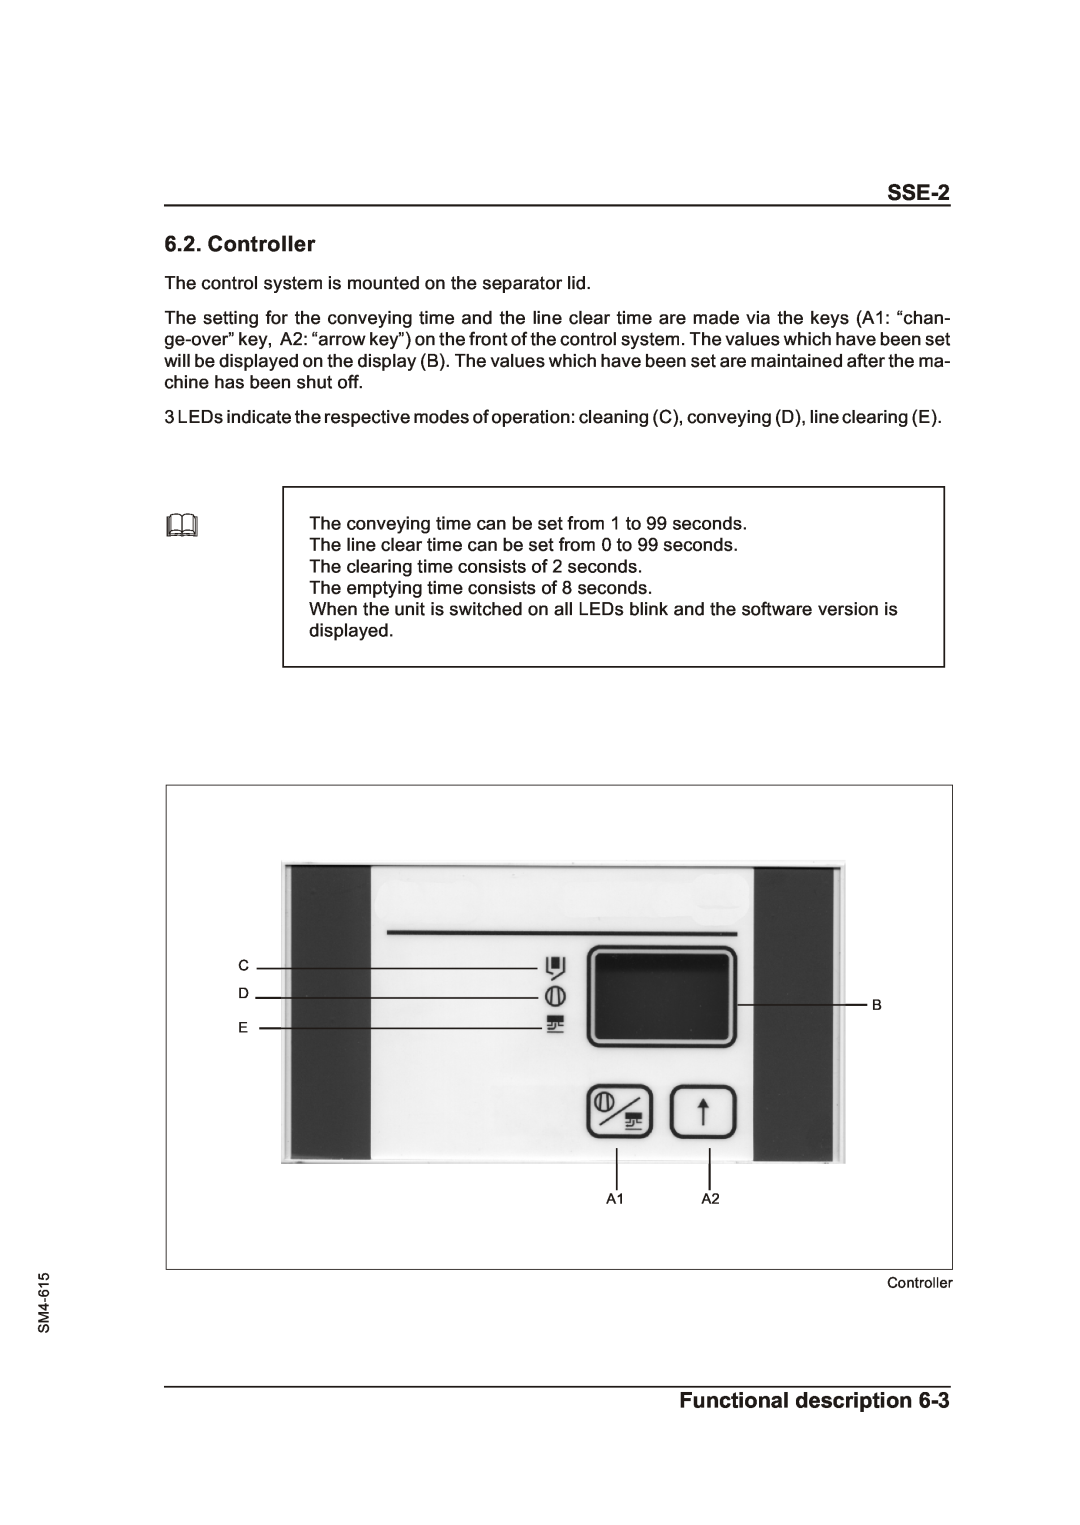 Sterling operating instructions SSE-2 6.2. Controller, Functional description 